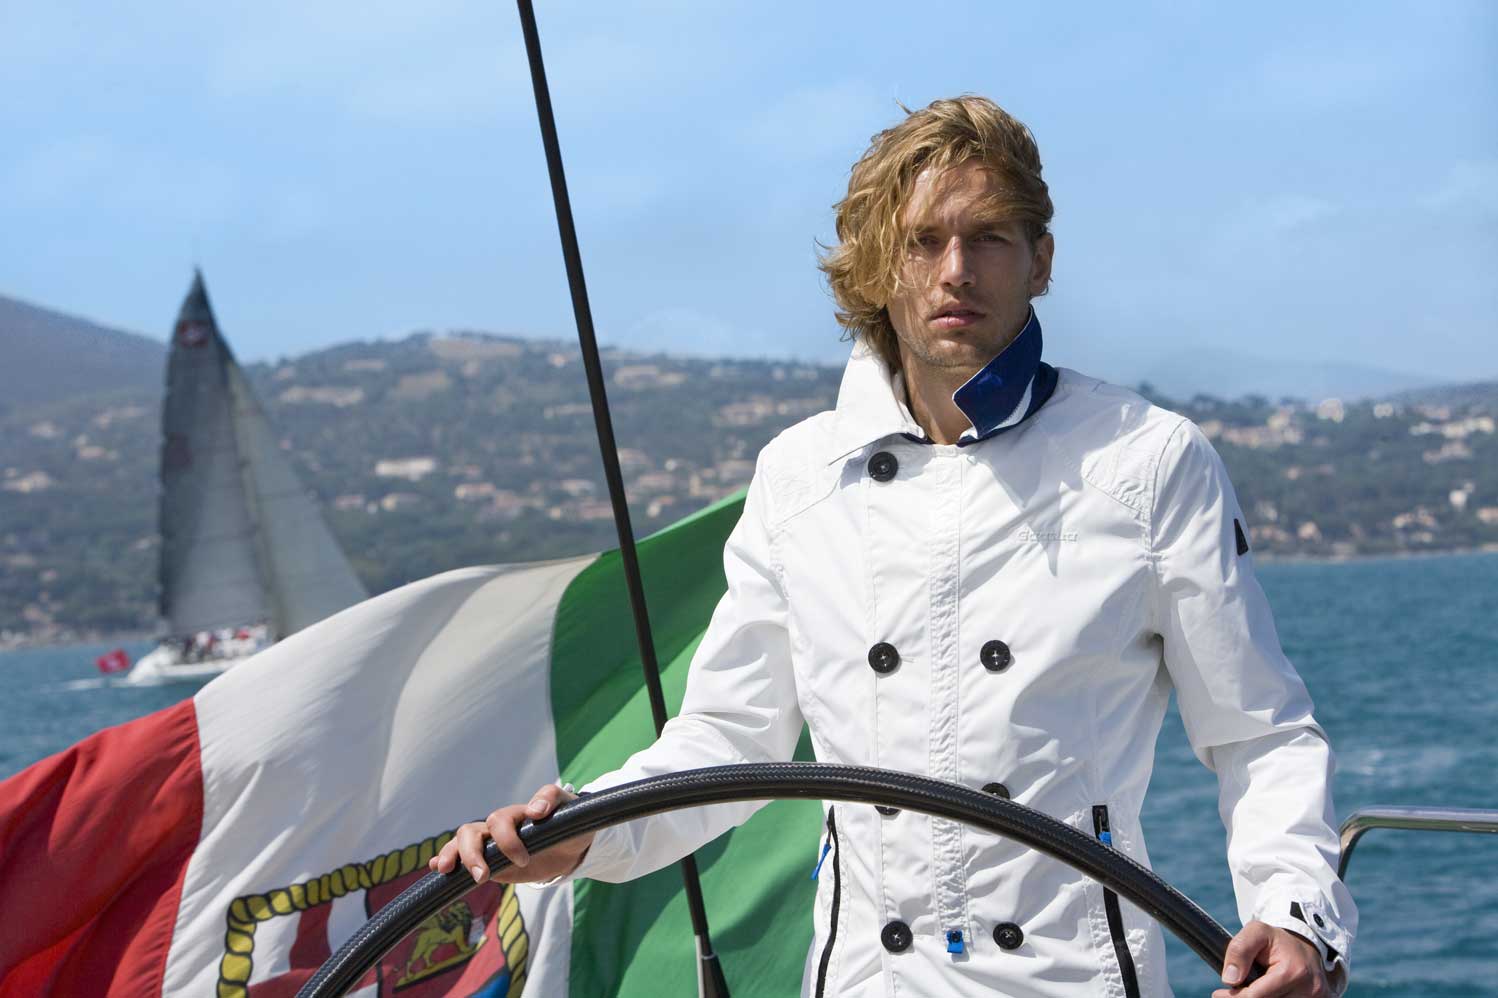 8 Best Sailing Clothing Brands To Conquer The High Seas In Style